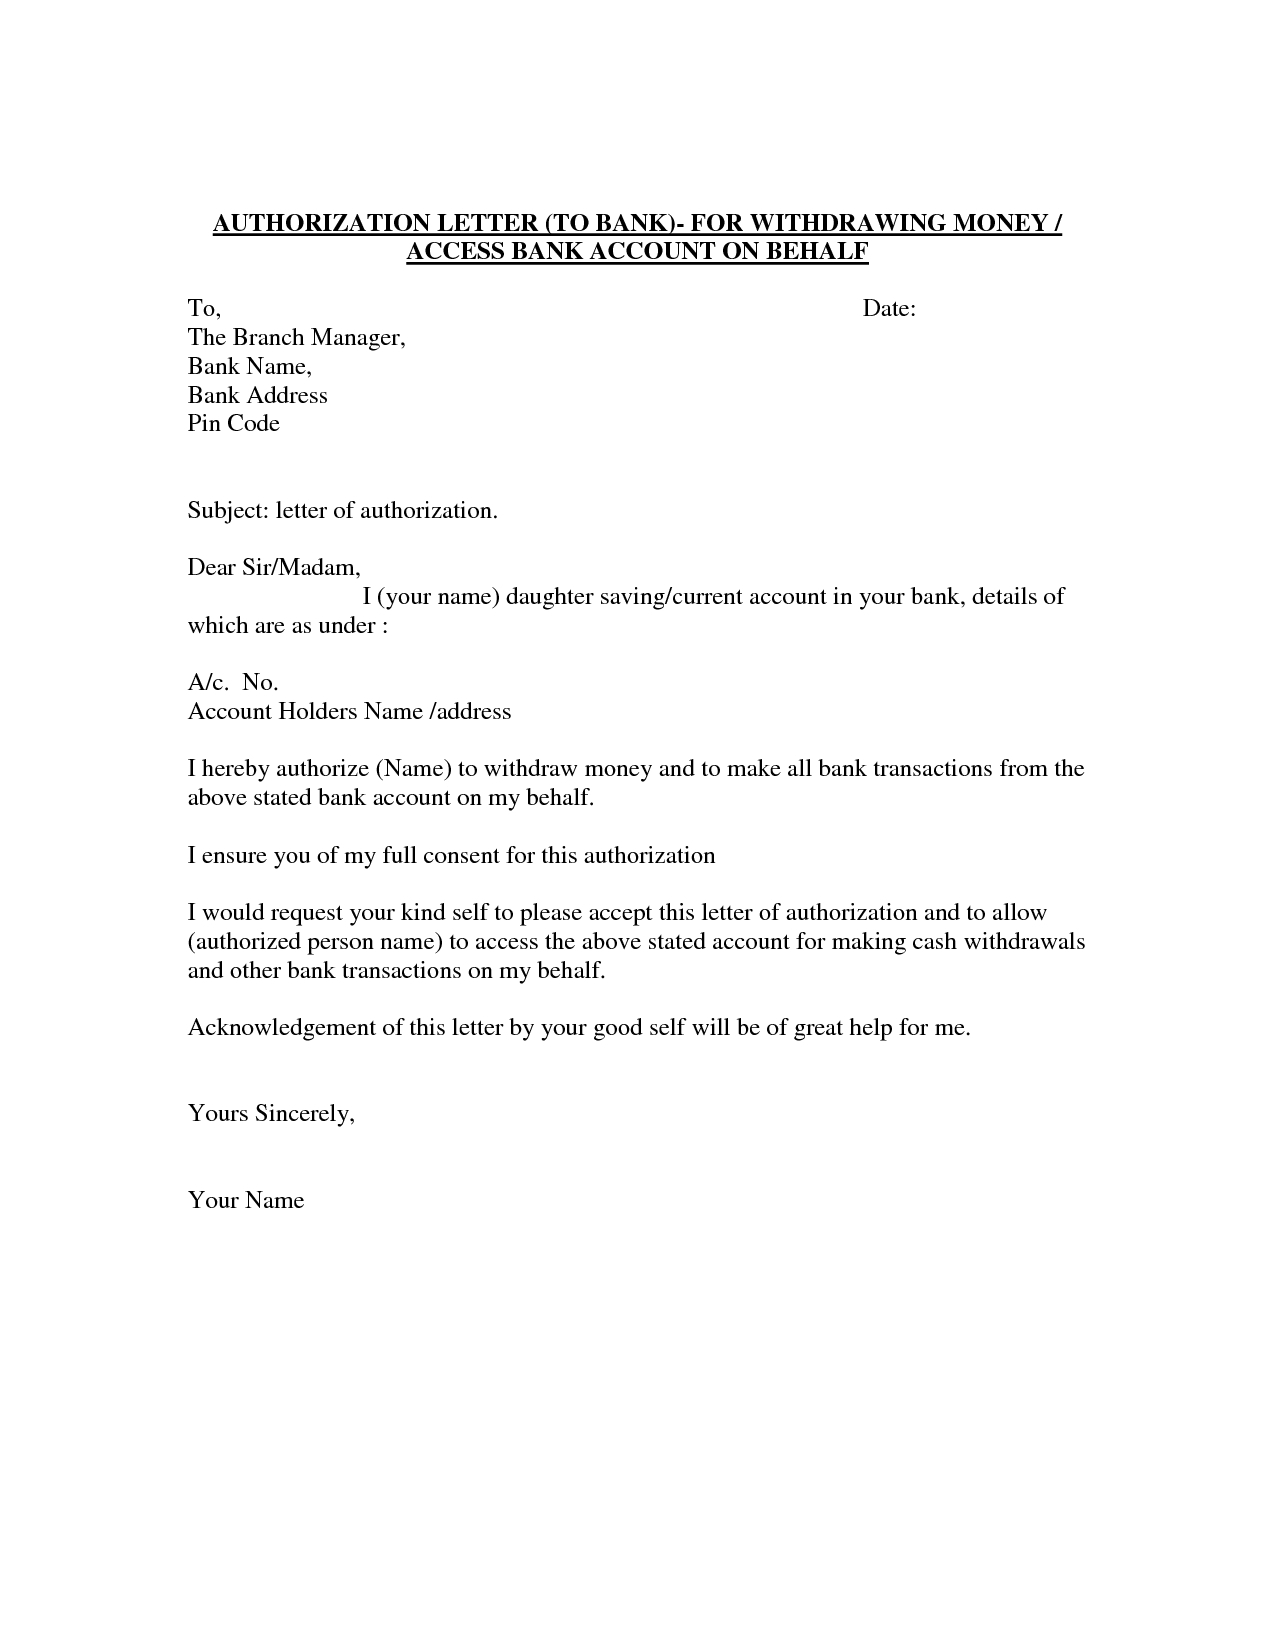 Loan Satisfaction Letter Template Examples | Letter within Loan Satisfaction Letter Template